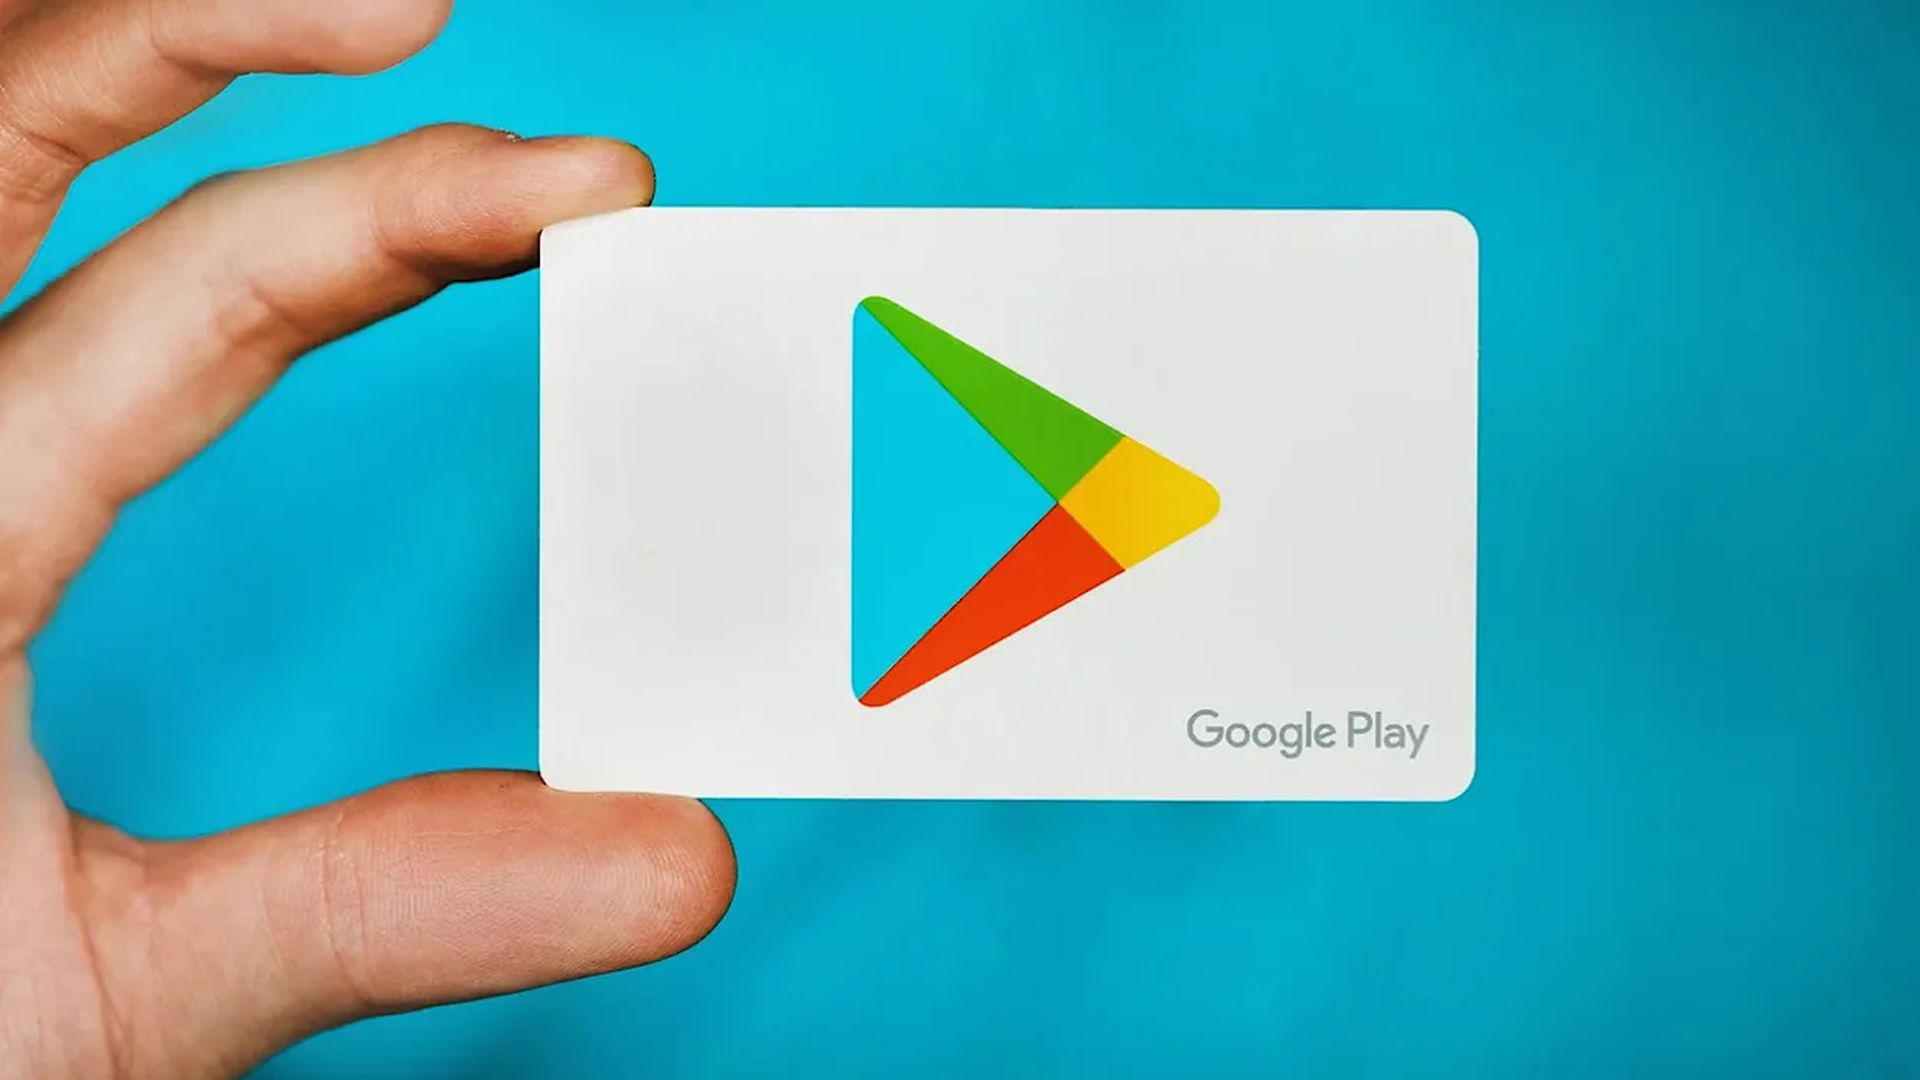 In this article, we are going to be covering the new Google Play Store policy update, which will ban many apps for various reasons.